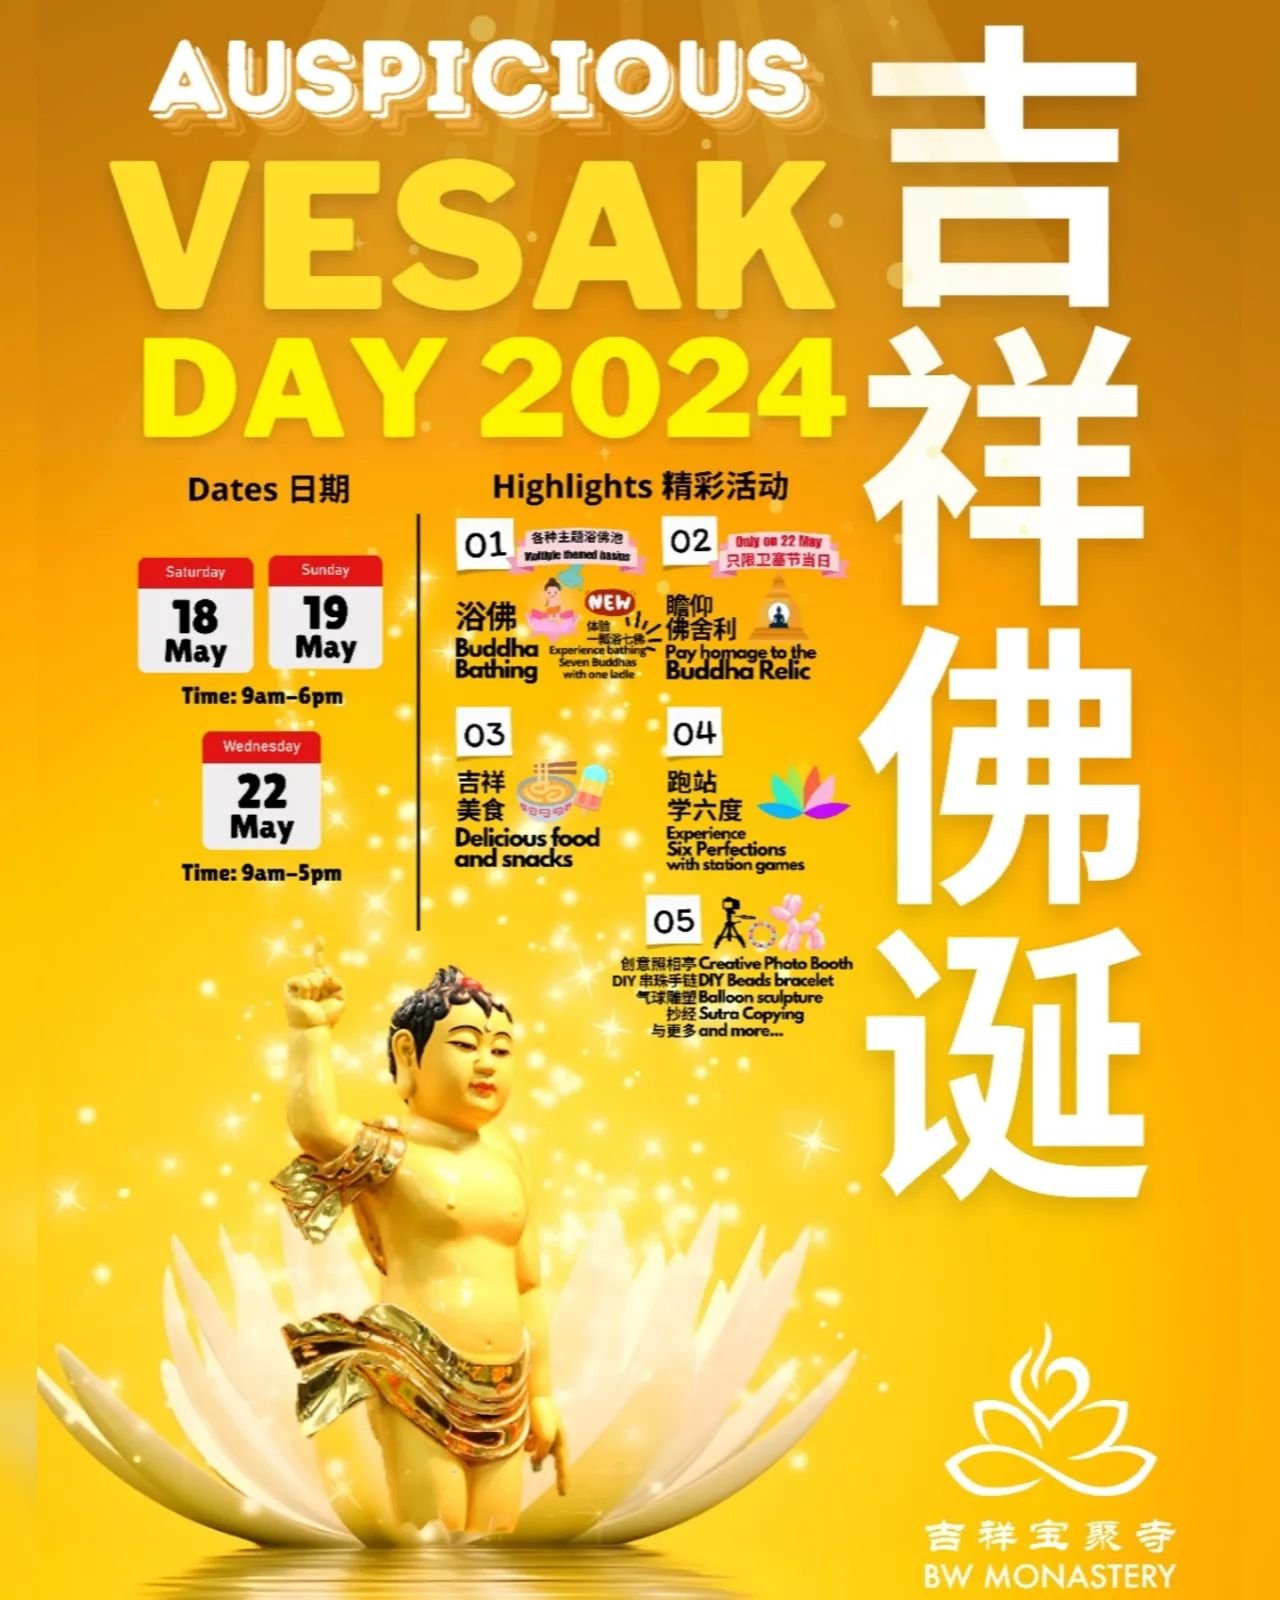 2024 Auspicious Vesak Day in BW Monastery 🙏🪷✨

Here are some of our Vesak Highlights this year:
1) Venerate the Buddha Relics
2) Bathe 7 Buddhas with ONE scoop
3) Vesak Food 
4) Creative Photo Booths
5) DIY Bead Bracelets
6) Sutra Copying and more.